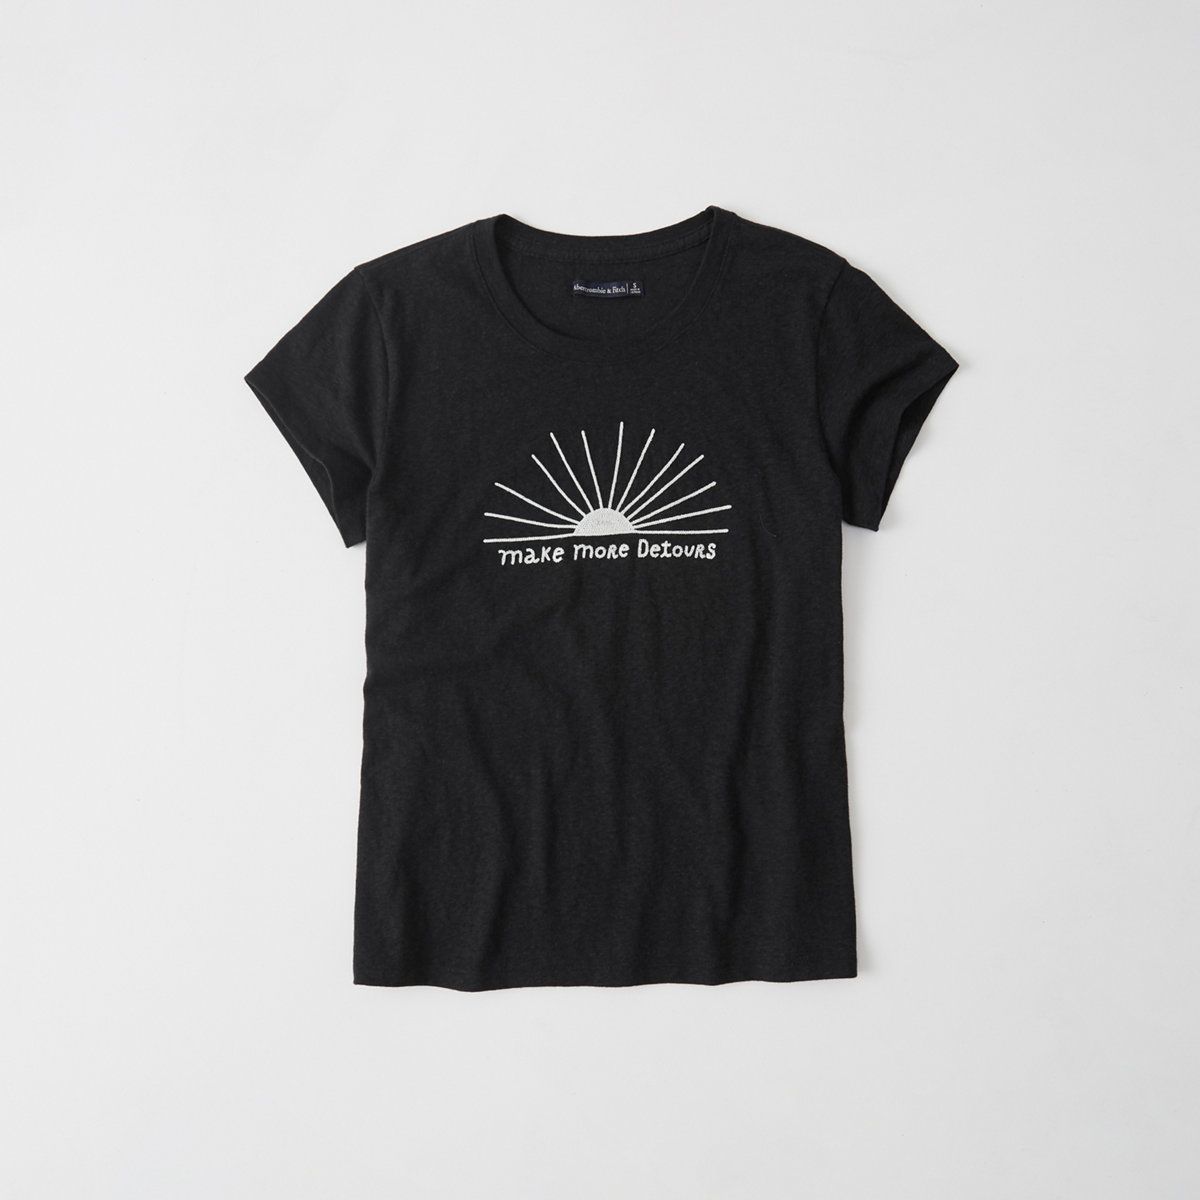 Embroidered Statement Tee | Abercrombie & Fitch US & UK